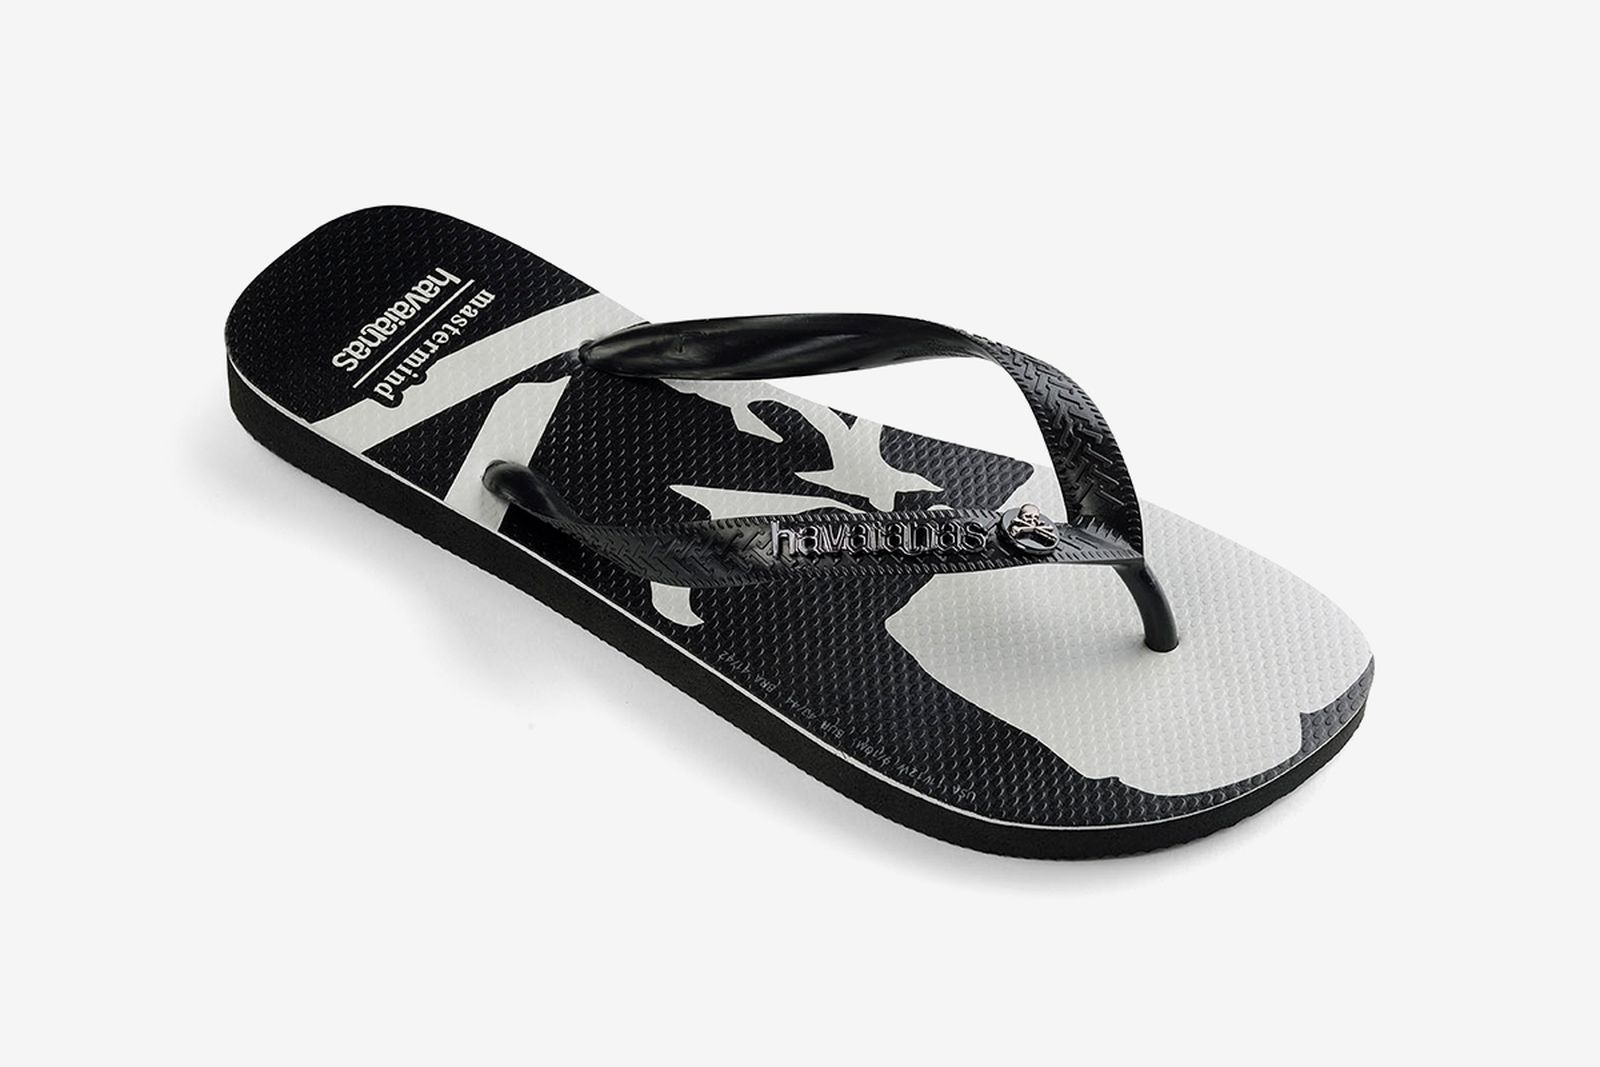 Mastermind x Havaianas: Release Info & Where to Cop